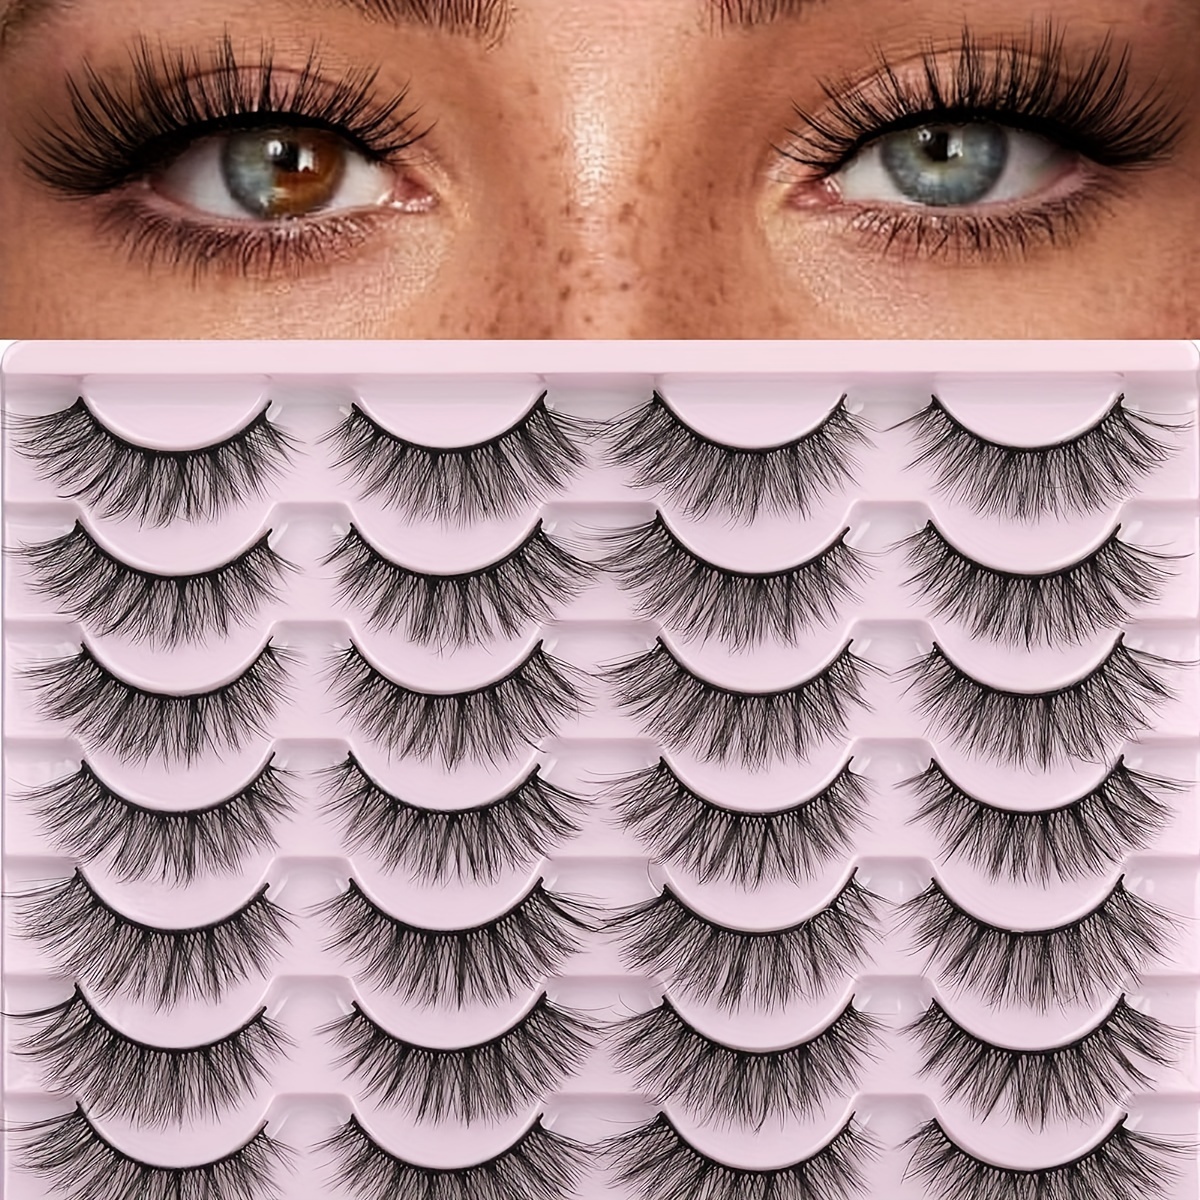 

14 Pairs False Eyelashes 14mm 3d Faux Mink Lashes Natural Look Fluffy Cat Eye Wispy Lashes Pack